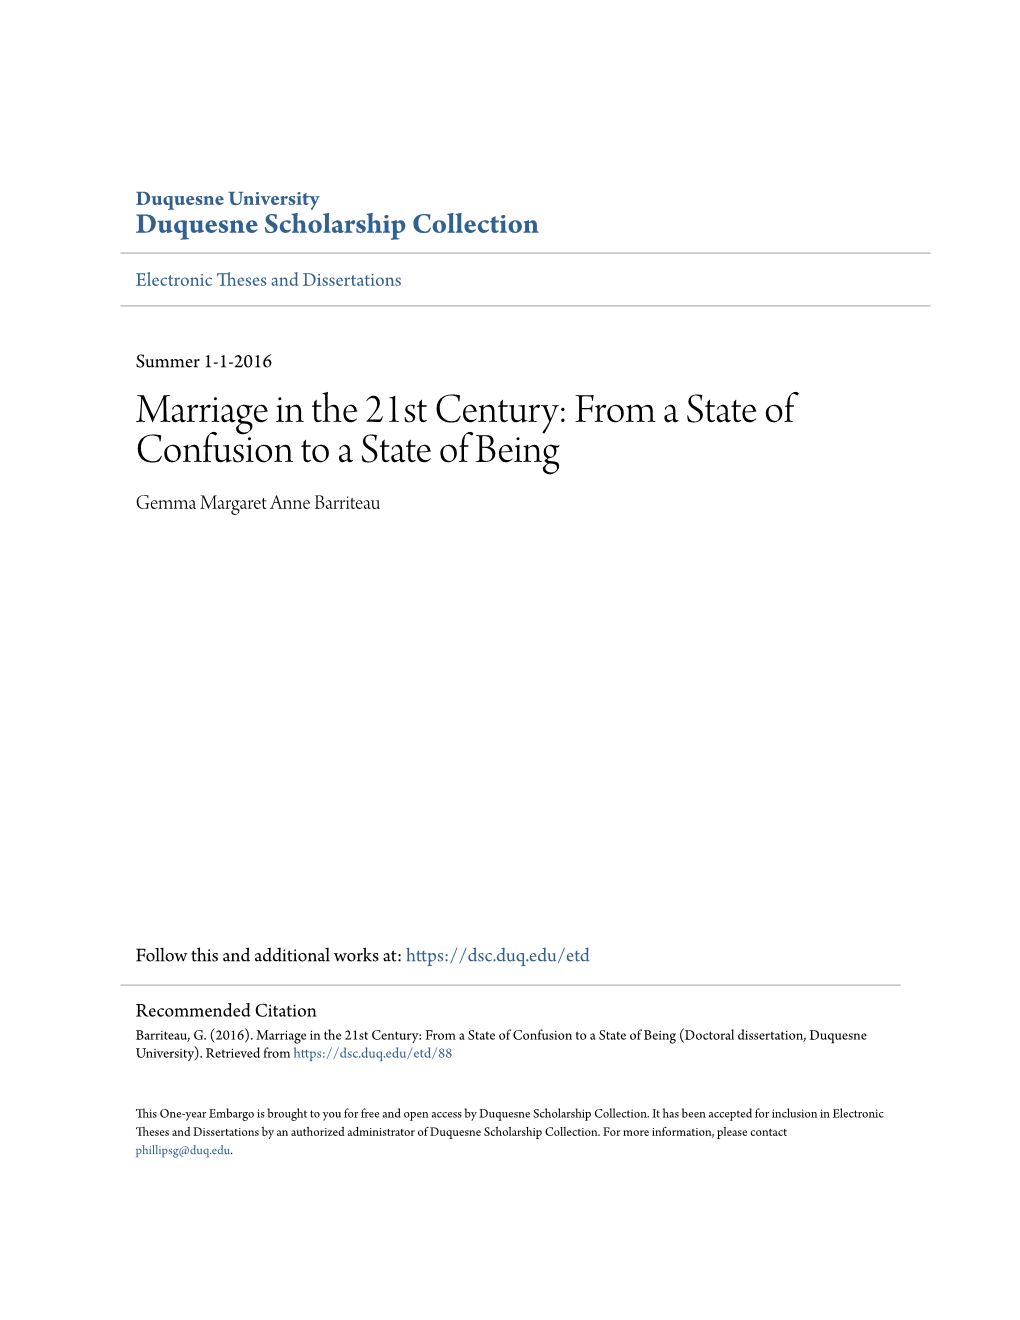 Marriage in the 21St Century: from a State of Confusion to a State of Being Gemma Margaret Anne Barriteau